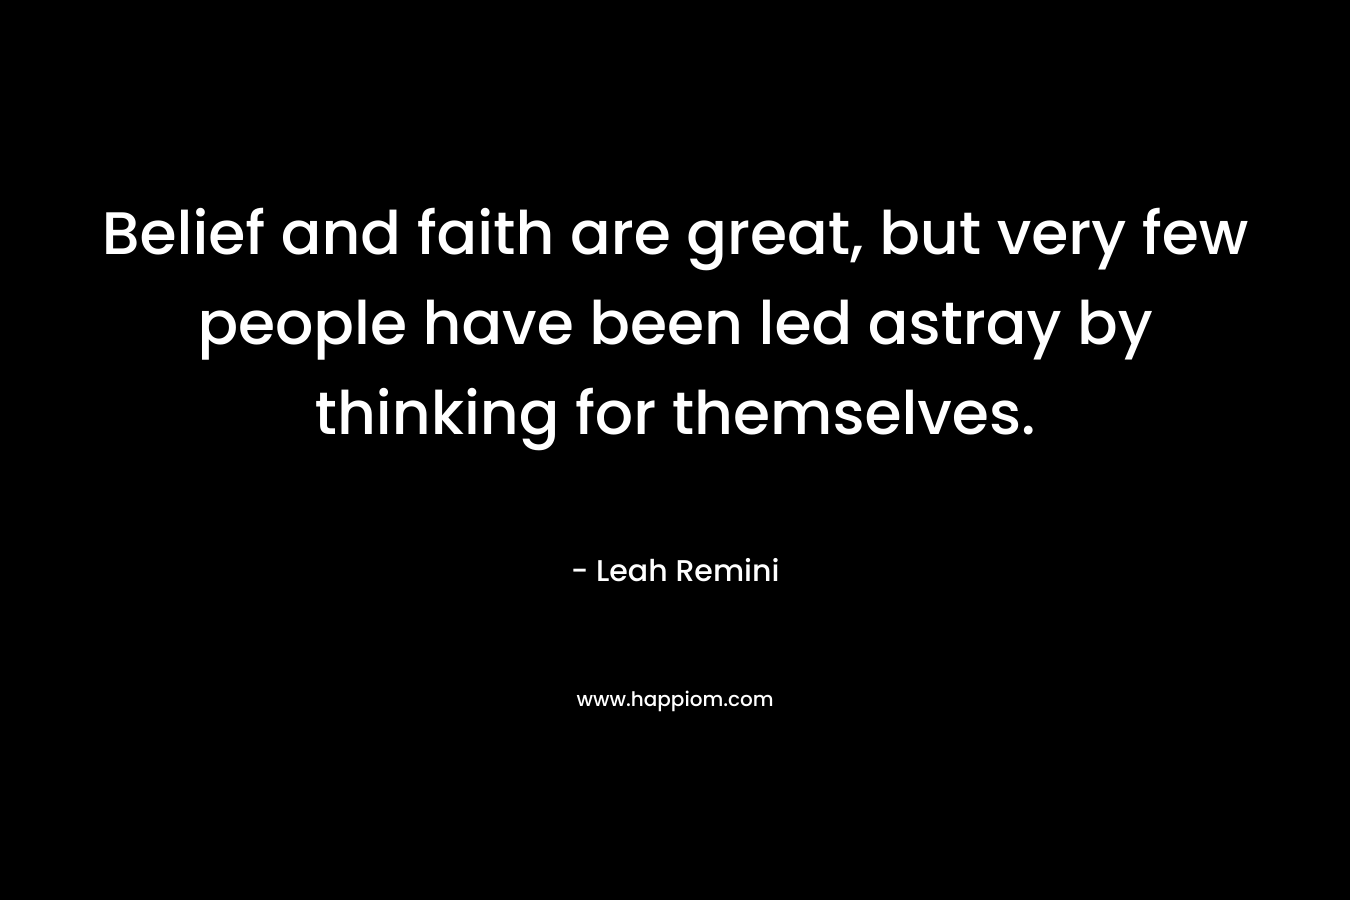 Belief and faith are great, but very few people have been led astray by thinking for themselves. – Leah Remini